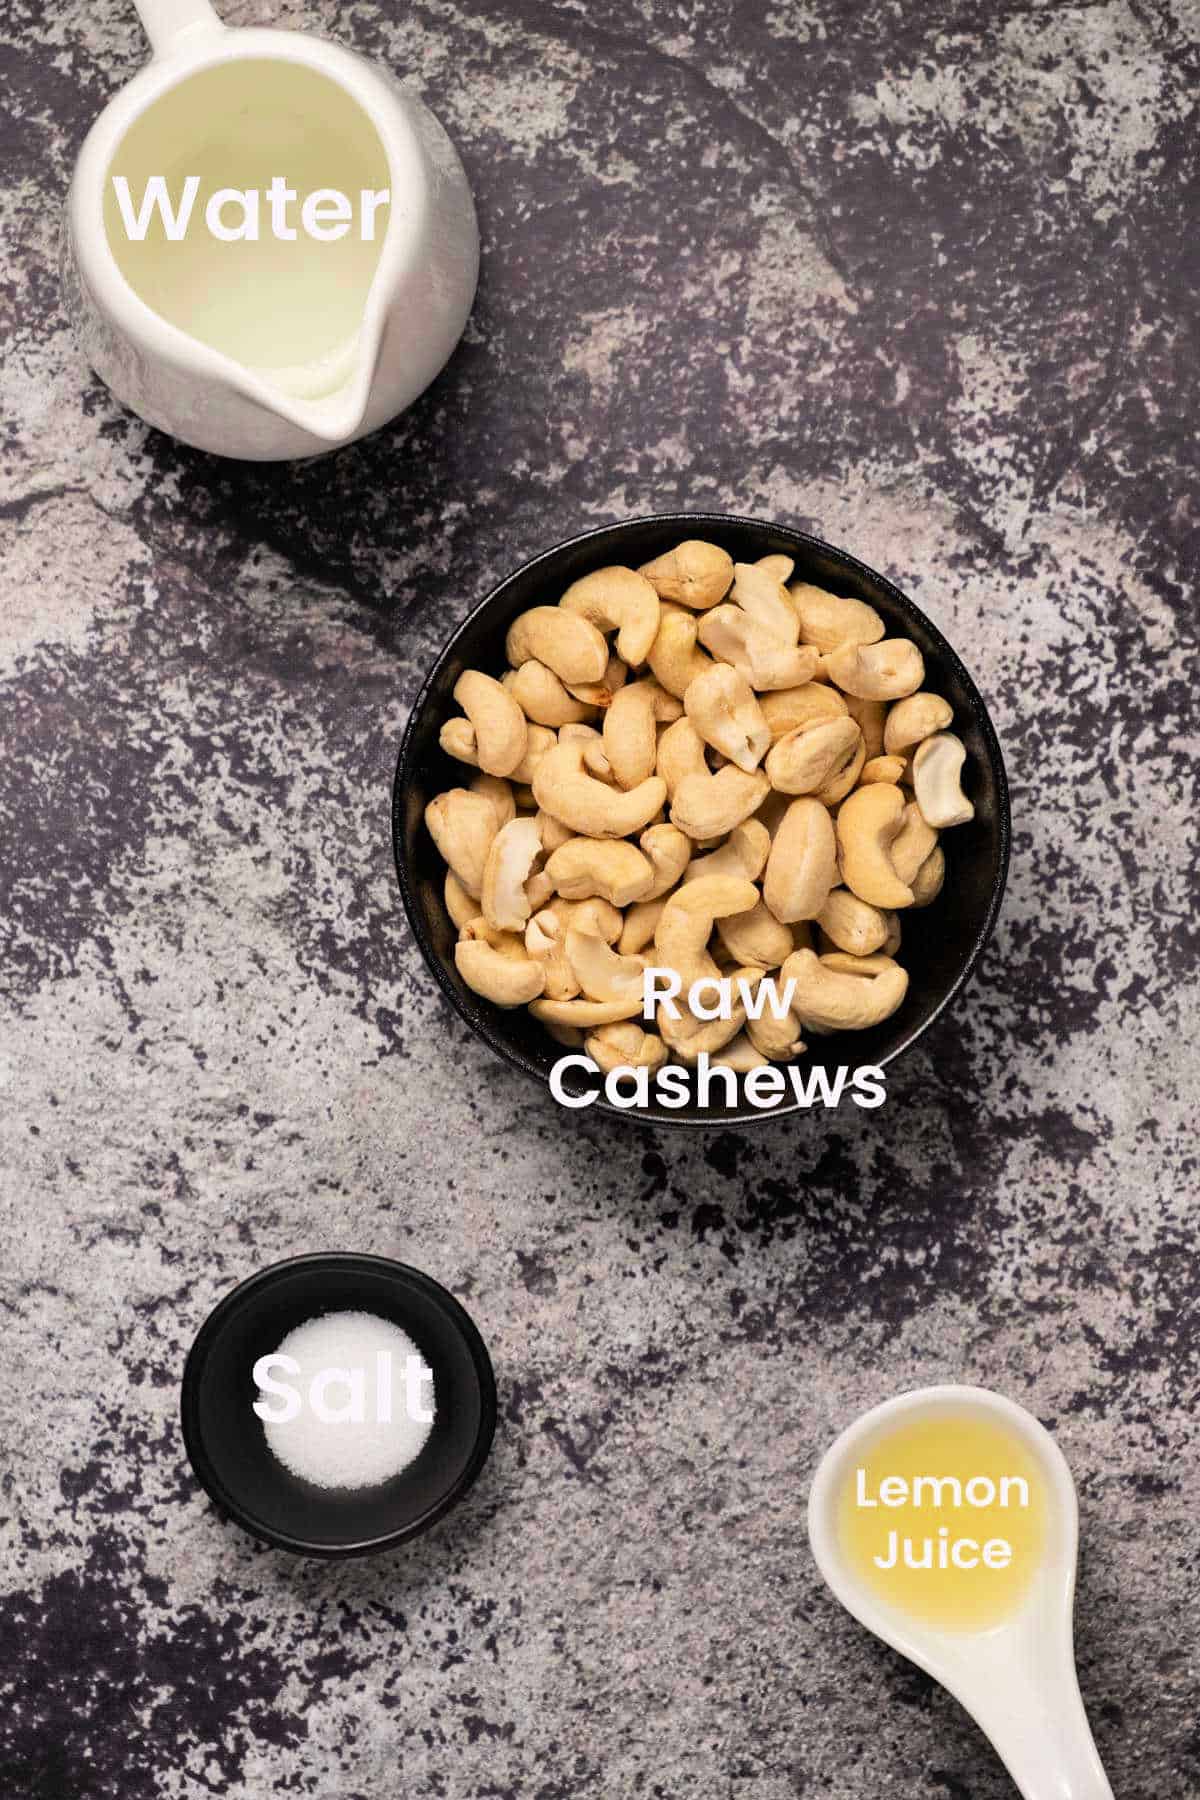 Photo of the ingredients needed to make cashew cream